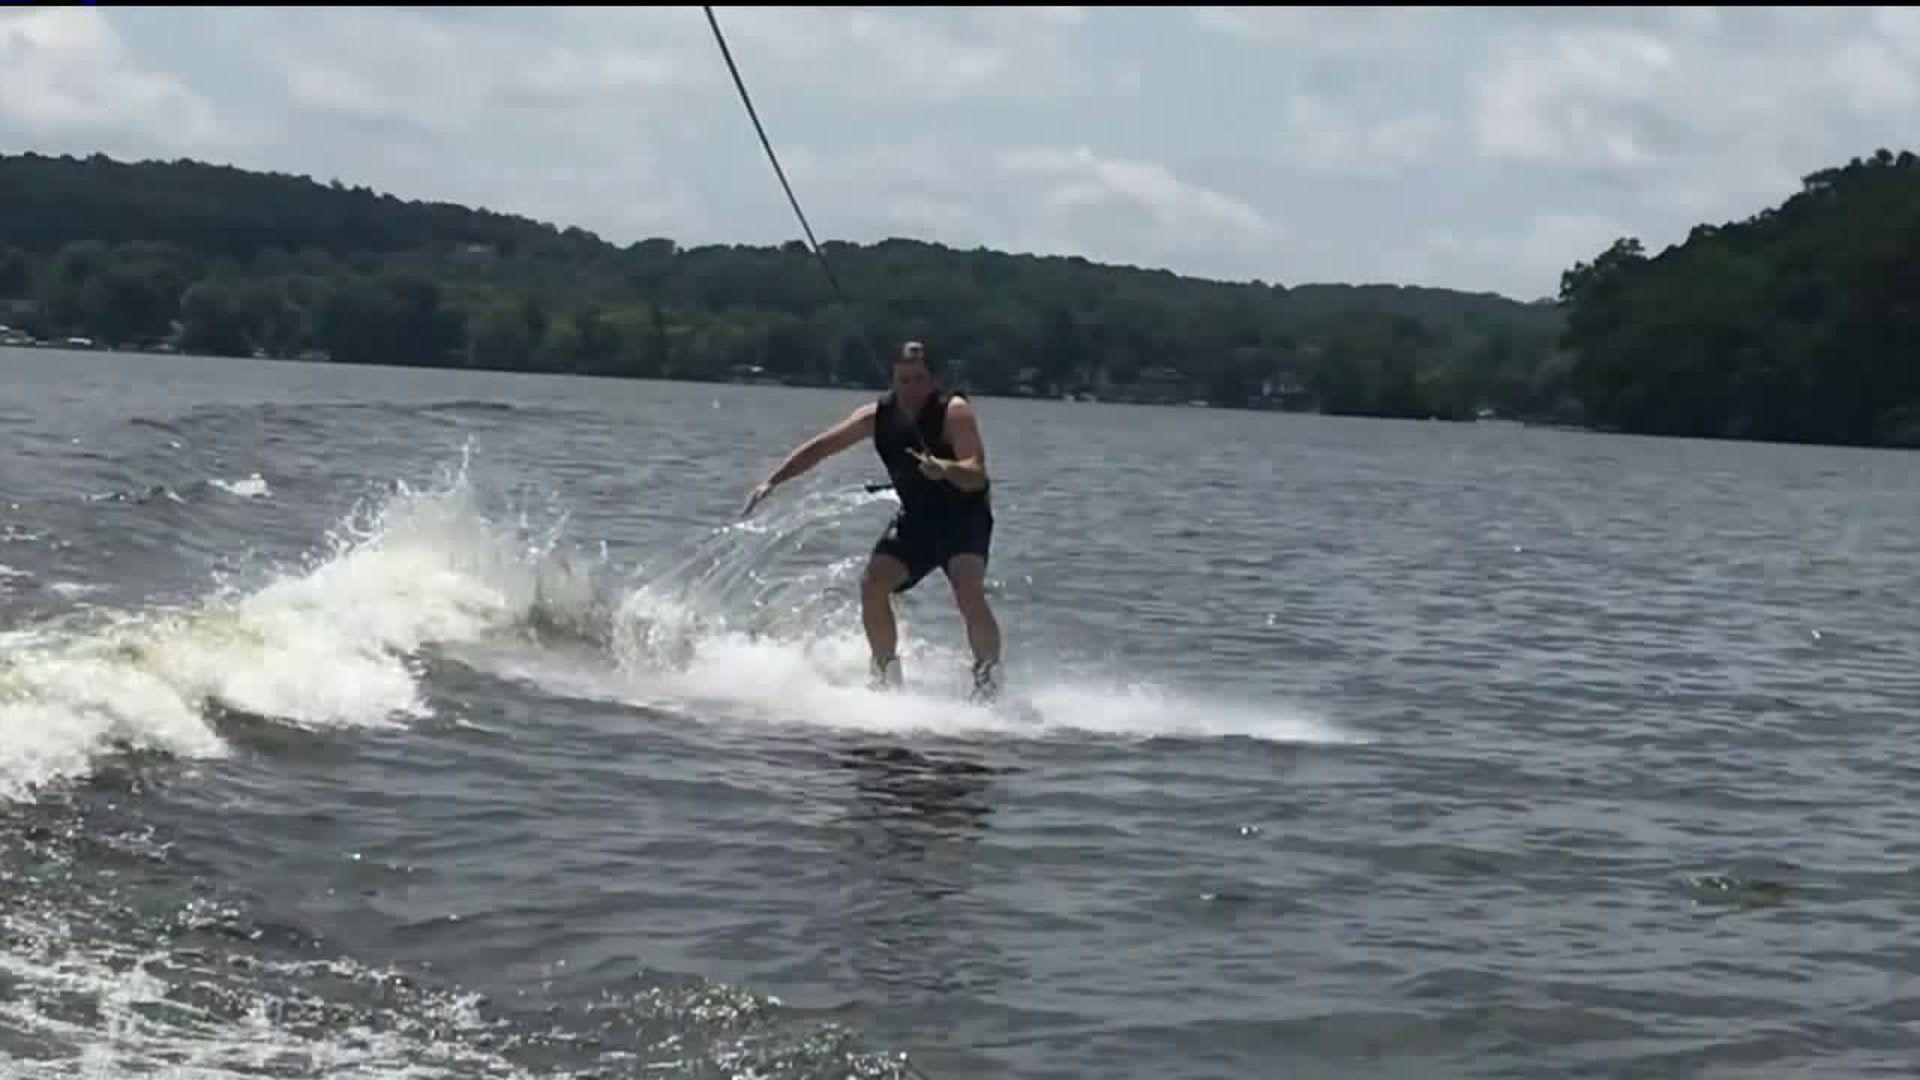 Gilson Celebrating Summer Snow Day, Expanding into Water Sports